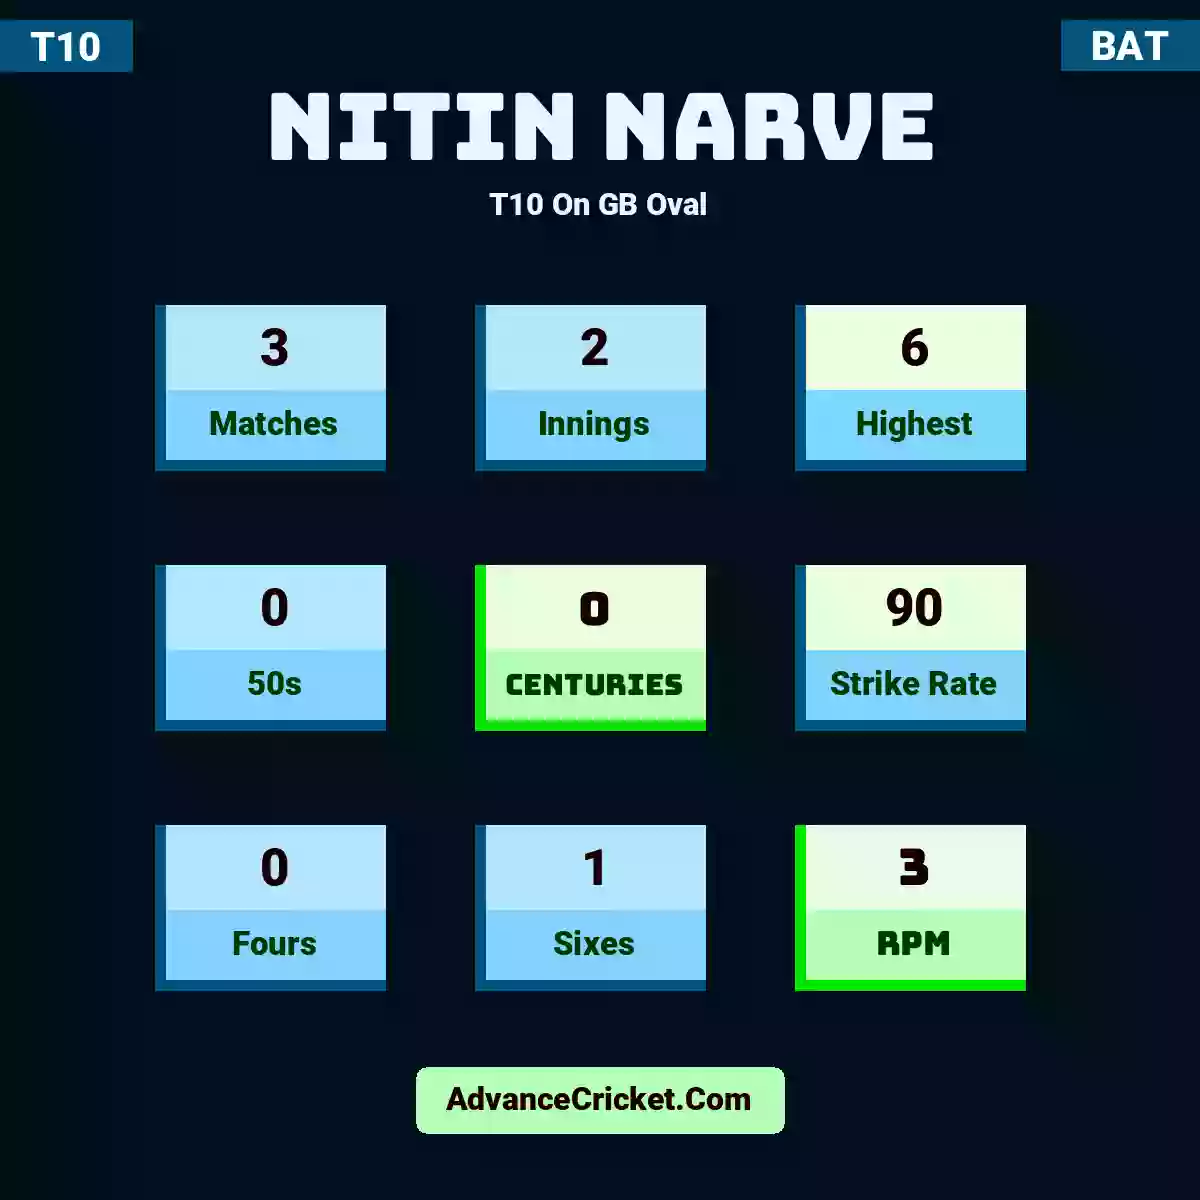 Nitin Narve T10  On GB Oval, Nitin Narve played 3 matches, scored 6 runs as highest, 0 half-centuries, and 0 centuries, with a strike rate of 90. N.Narve hit 0 fours and 1 sixes, with an RPM of 3.